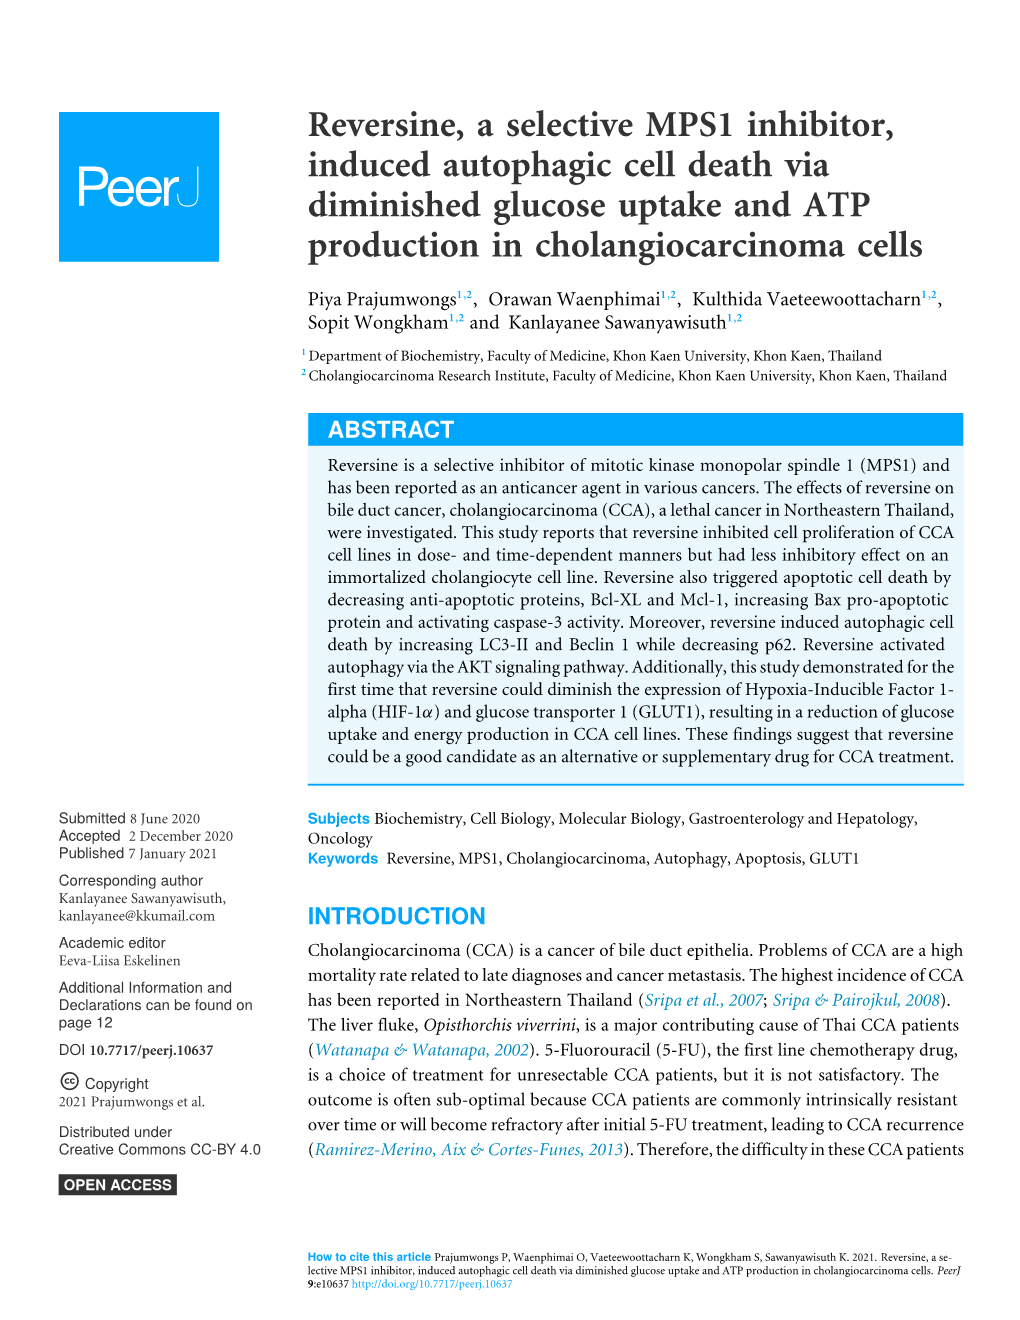 Reversine, a Selective MPS1 Inhibitor, Induced Autophagic Cell Death Via Diminished Glucose Uptake and ATP Production in Cholangiocarcinoma Cells